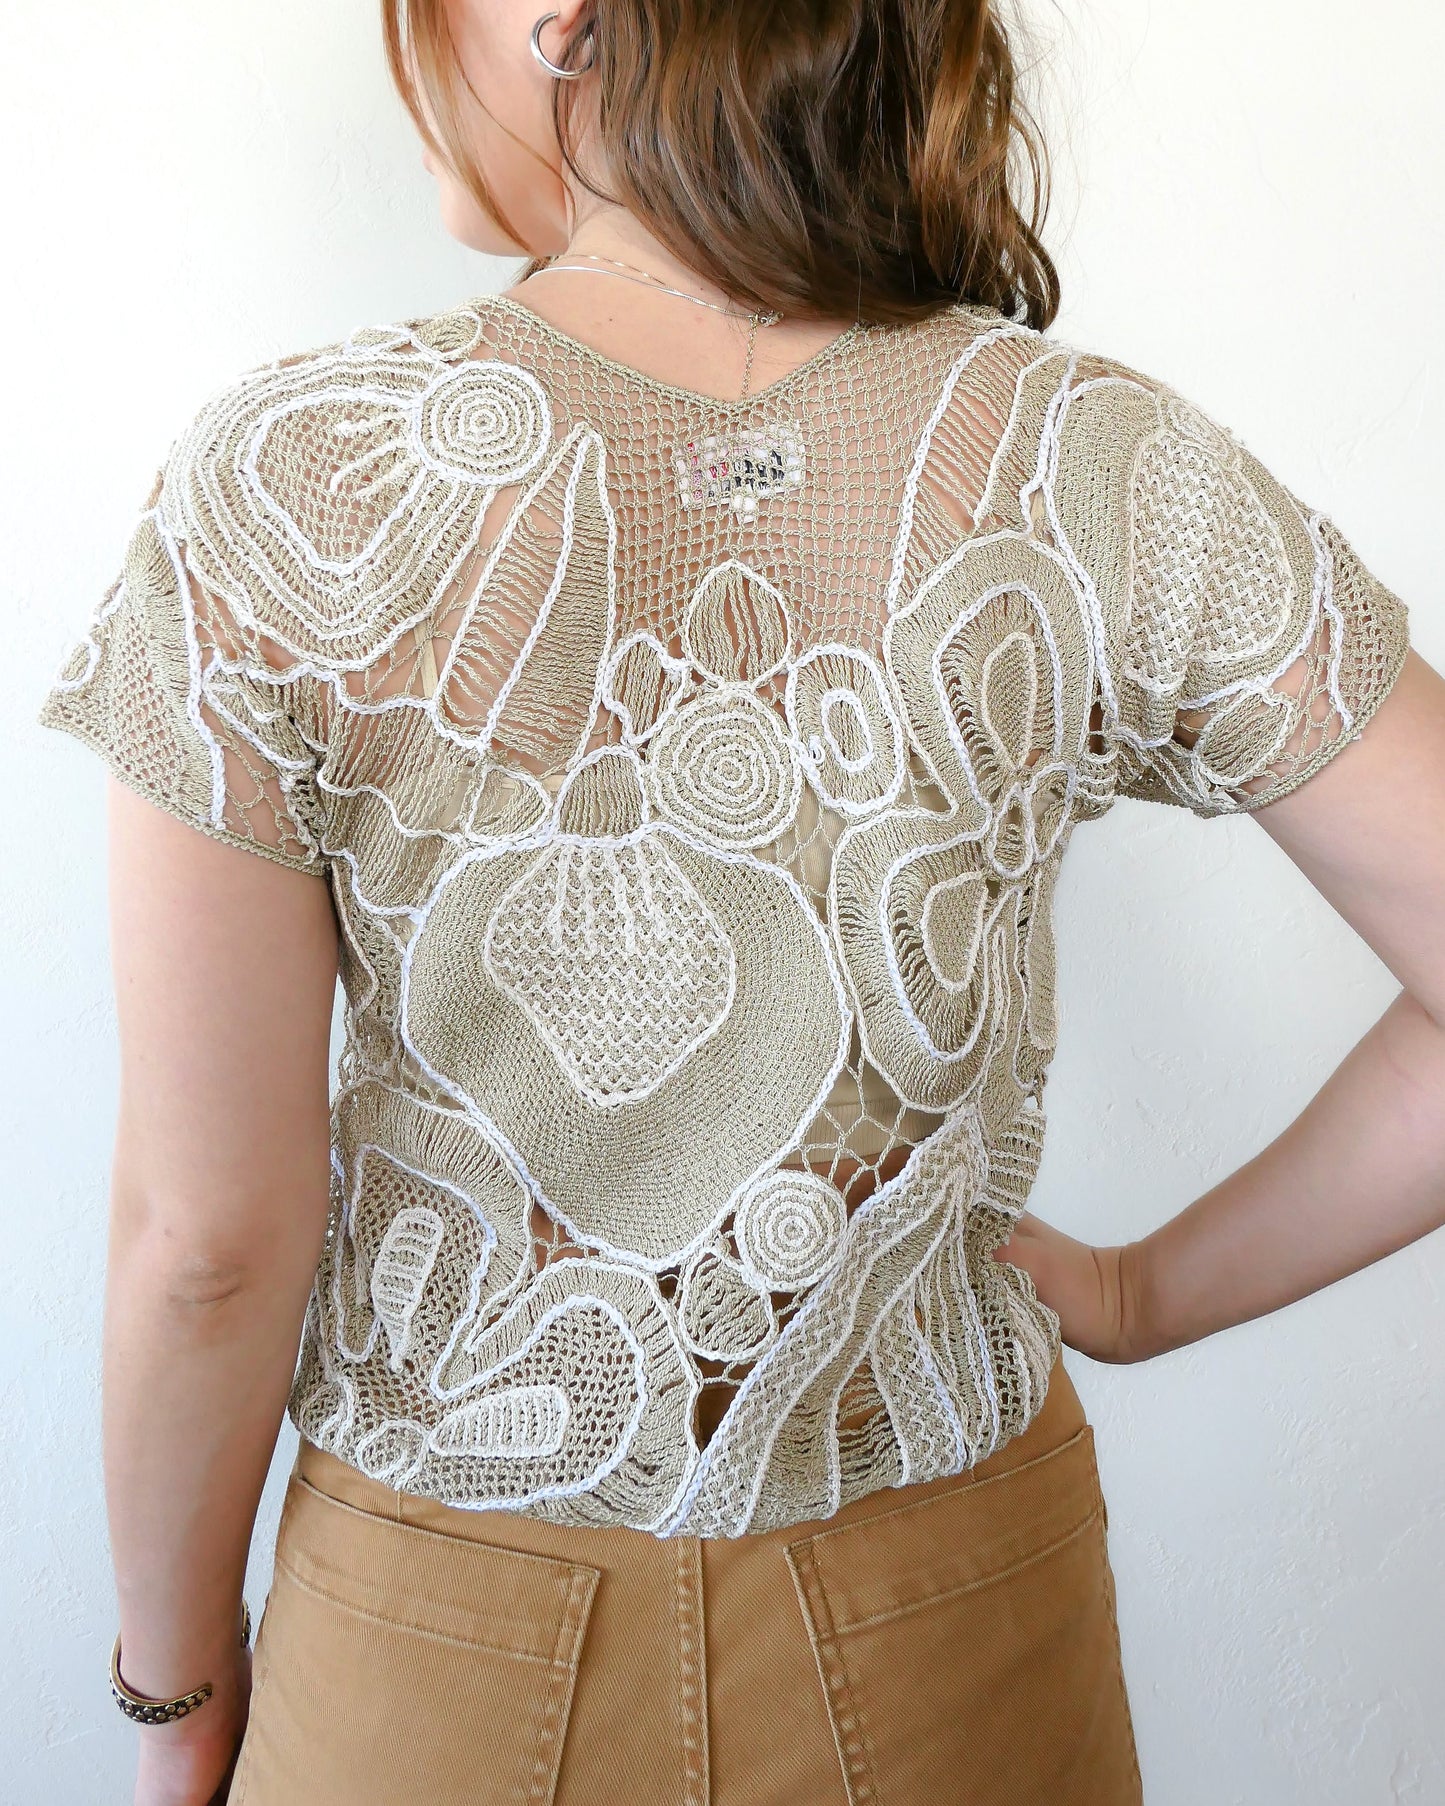 Back view of crochet top.  Refresh your wardrobe with this abstract floral patterned hand crocheted Lim's Vintage original high V-neck pullover top from the 1980s in neutral tones of taupe and white.  Pair it with jeans or shorts and sandals, or dress it up with a flowy skirt and wedges for a night out on a warm, summer's eve.